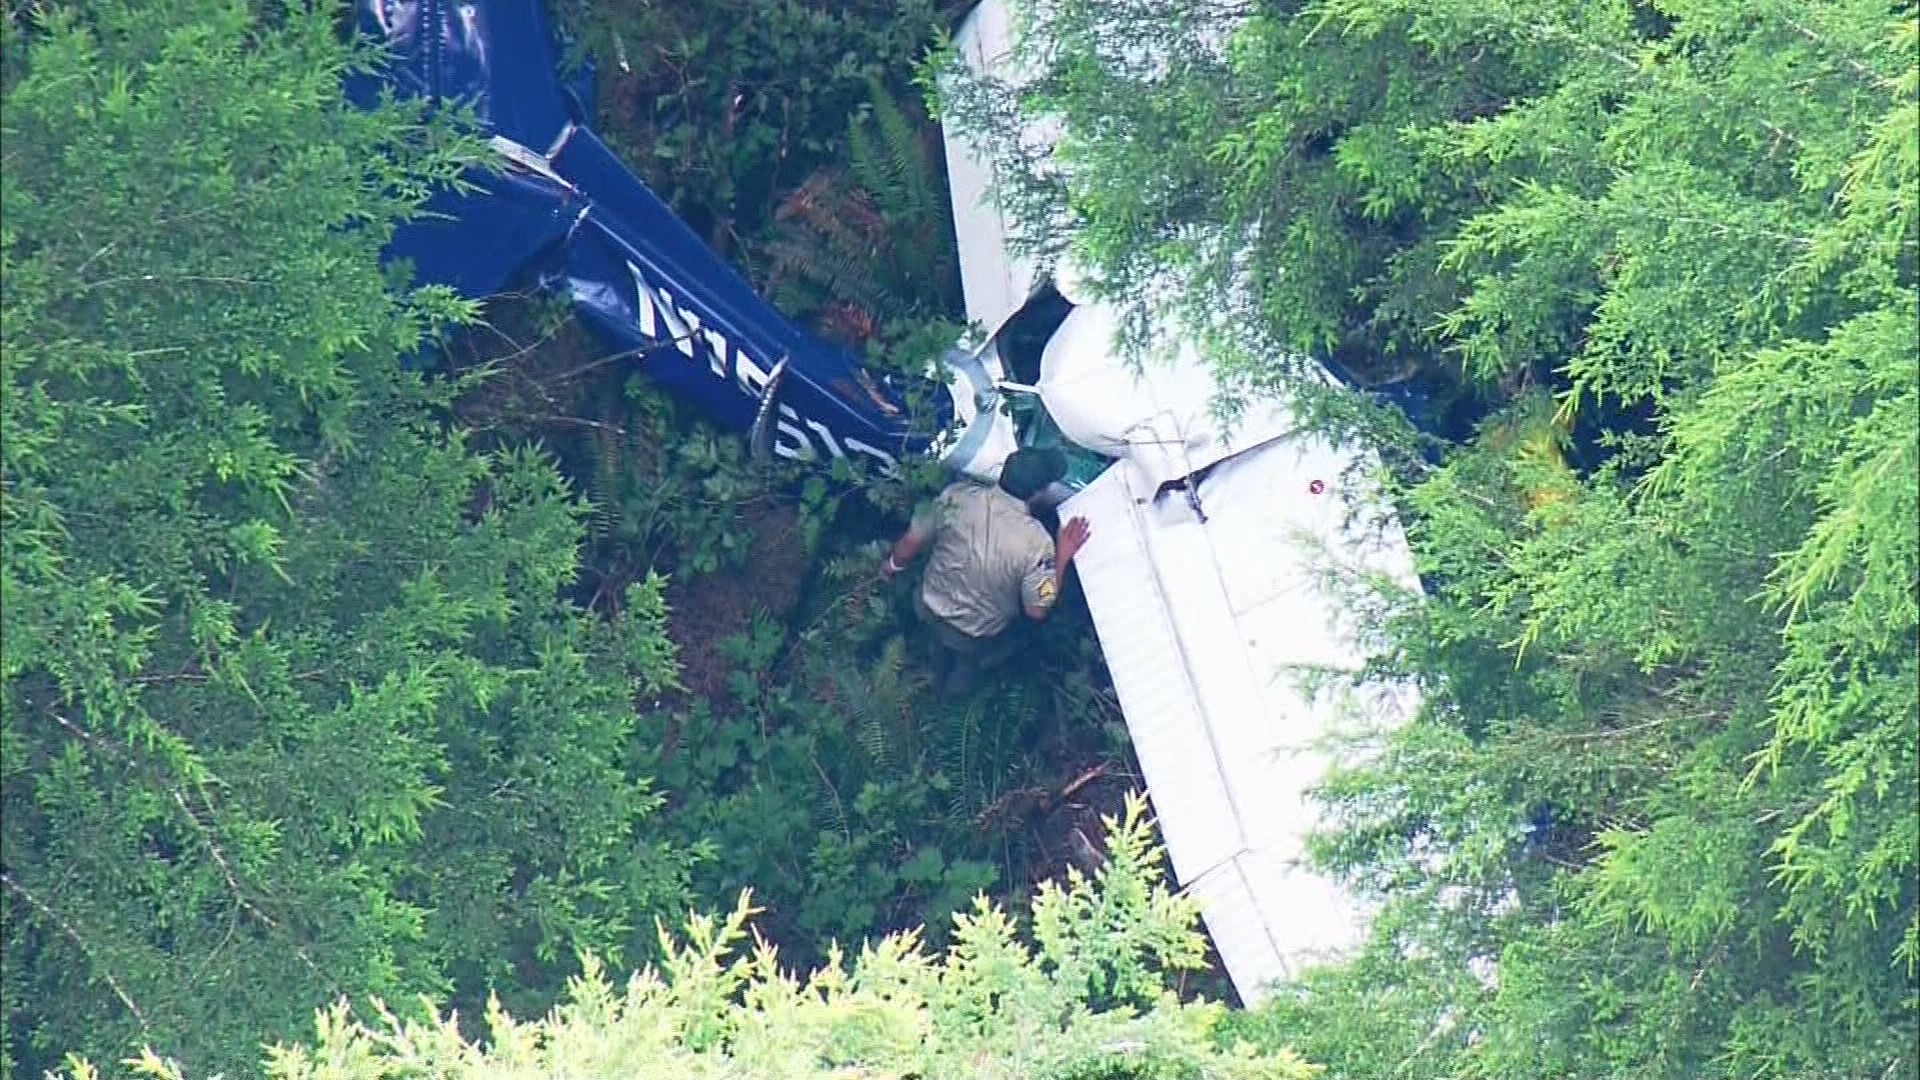 Aerials of plane crash in Olympic National Park